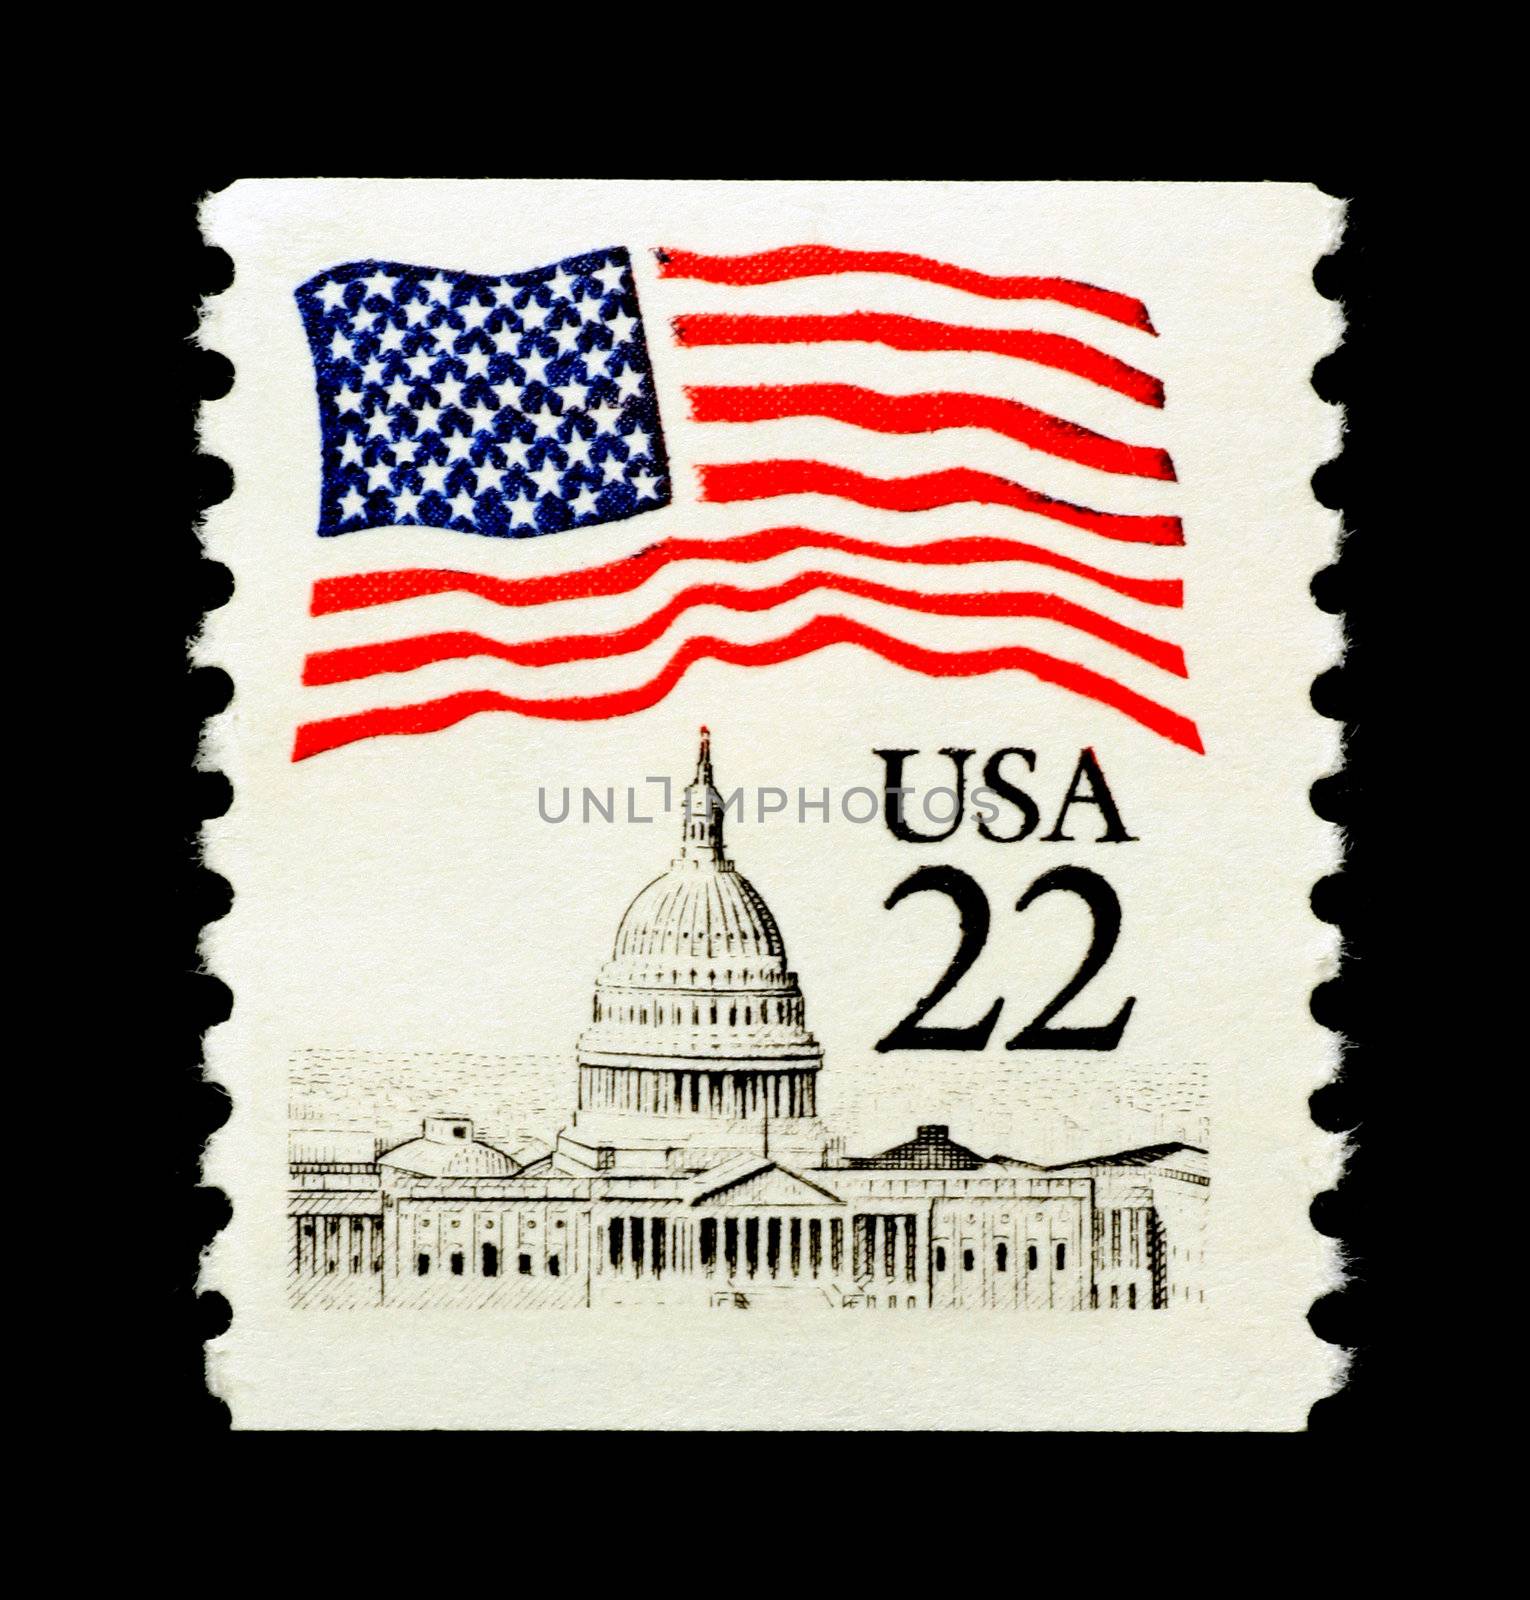 Patriotic stamp featuring usa capitol and flag